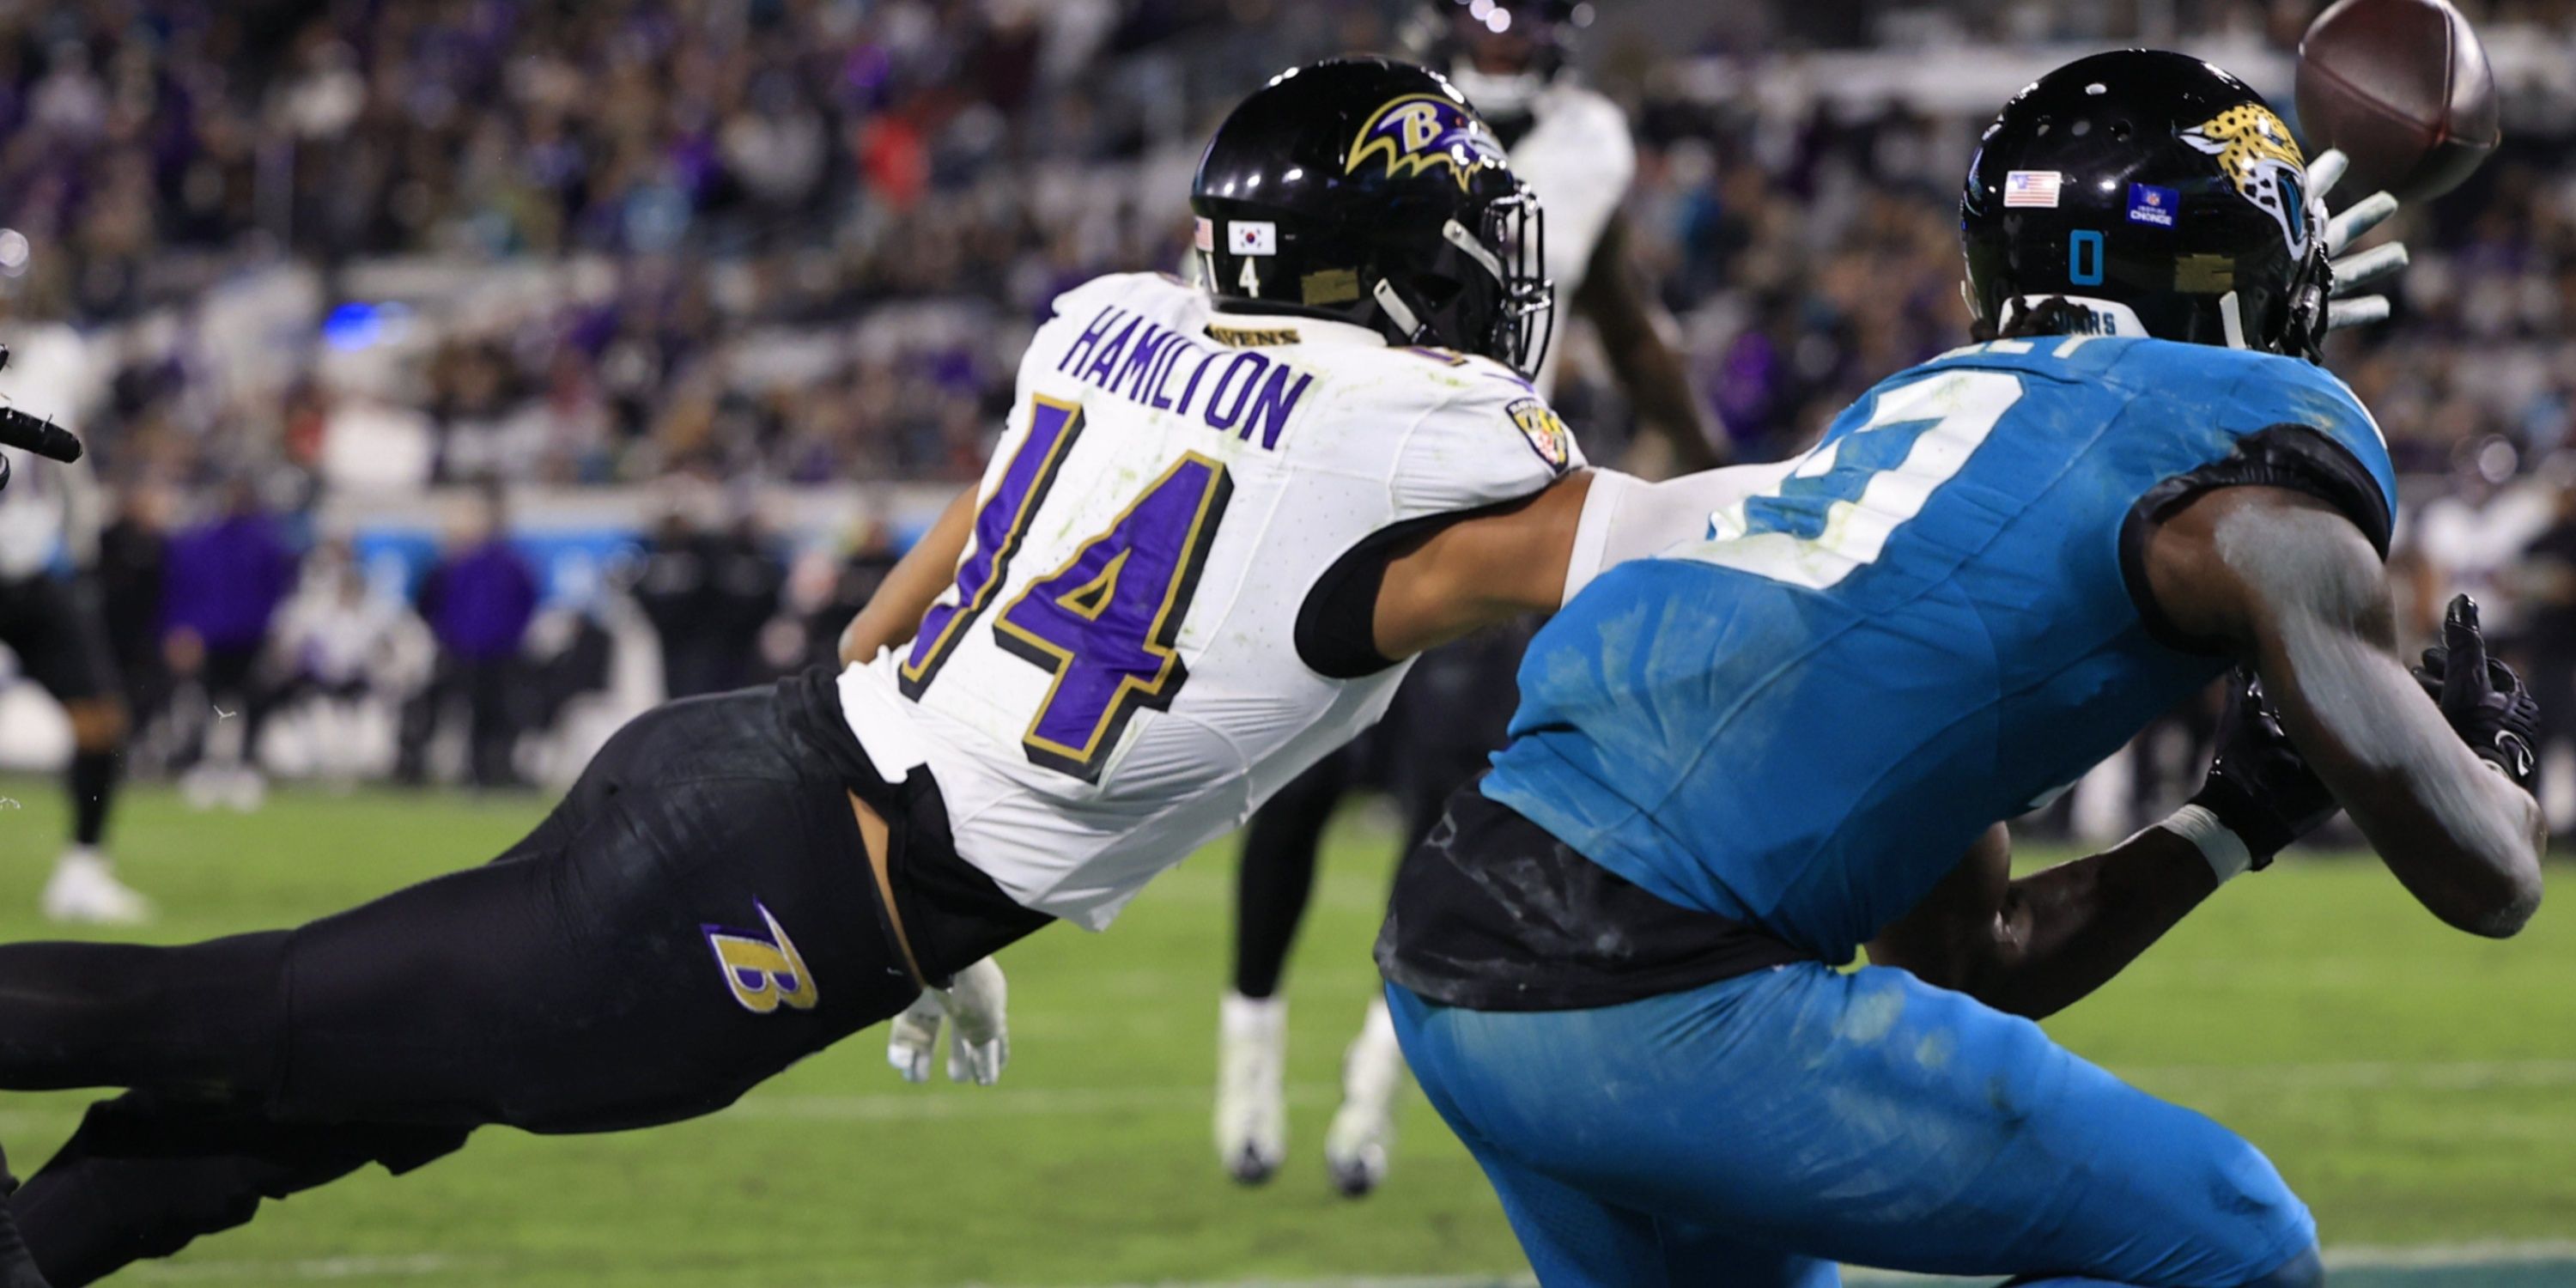 New Ravens DC Believes Kyle Hamilton is 'One of the Top Players' in the NFL